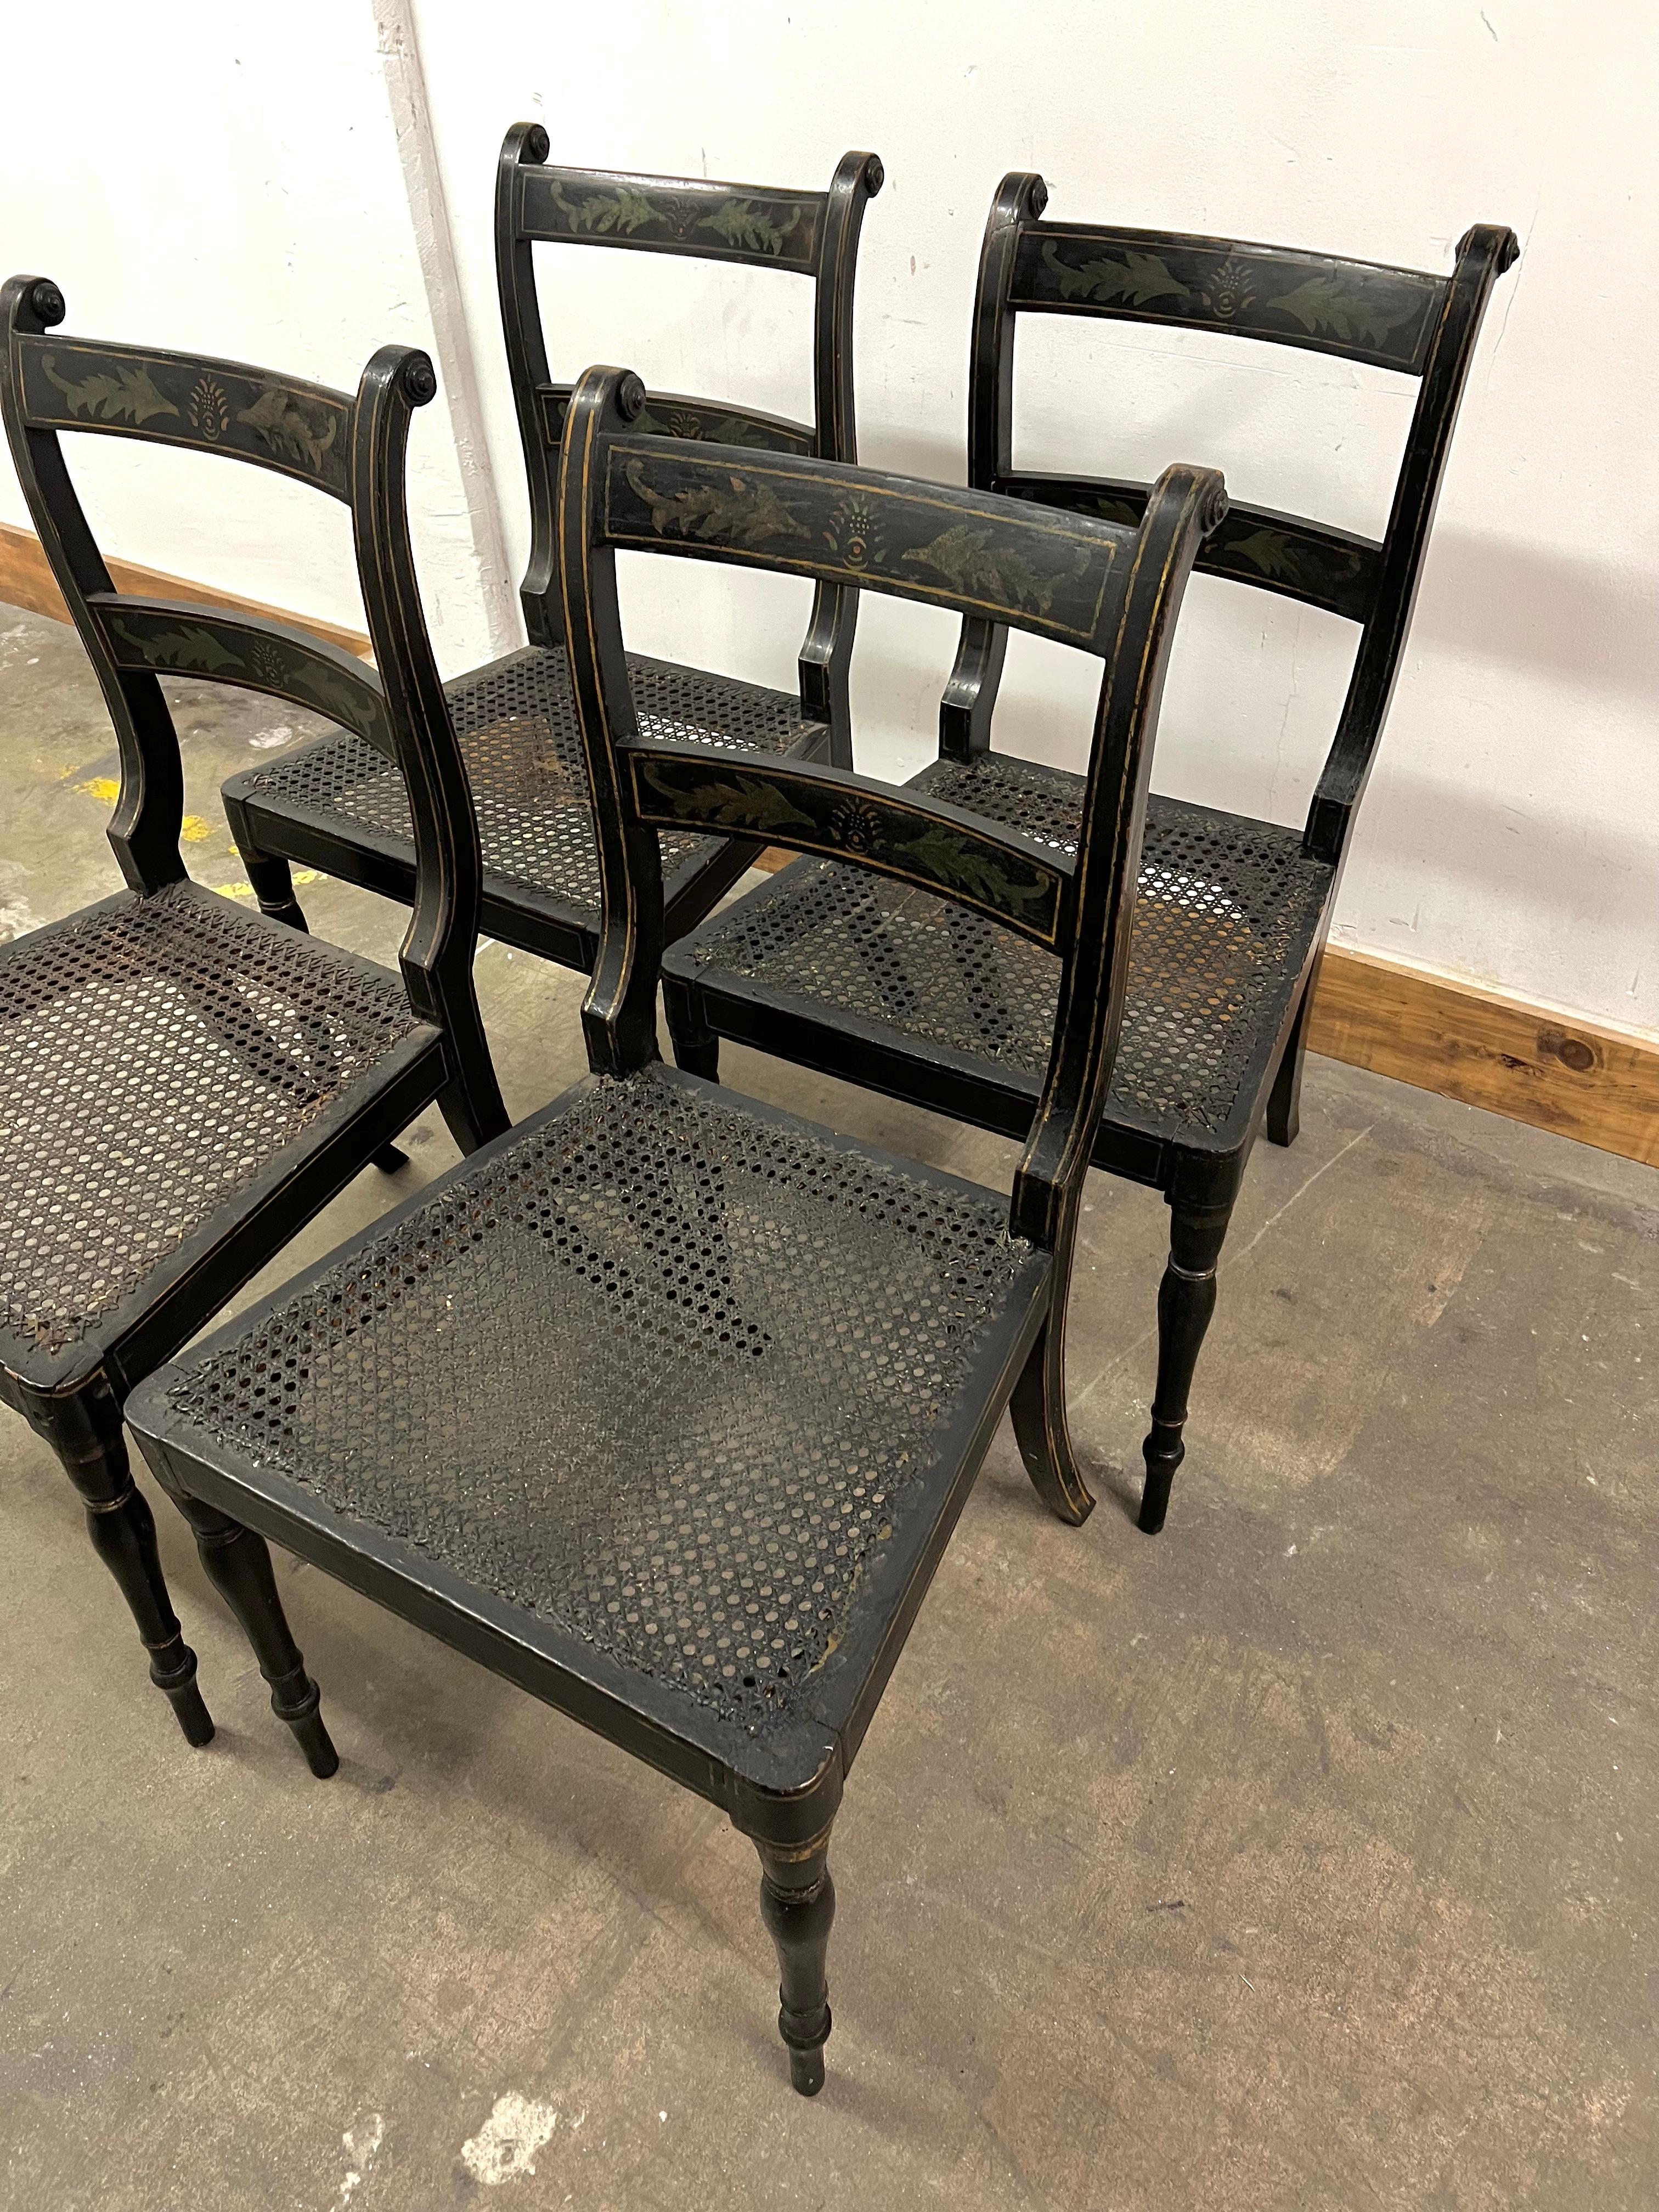 Hand-Painted 4 Stenciled New England Hitchcock Style Chairs with Cane Seats